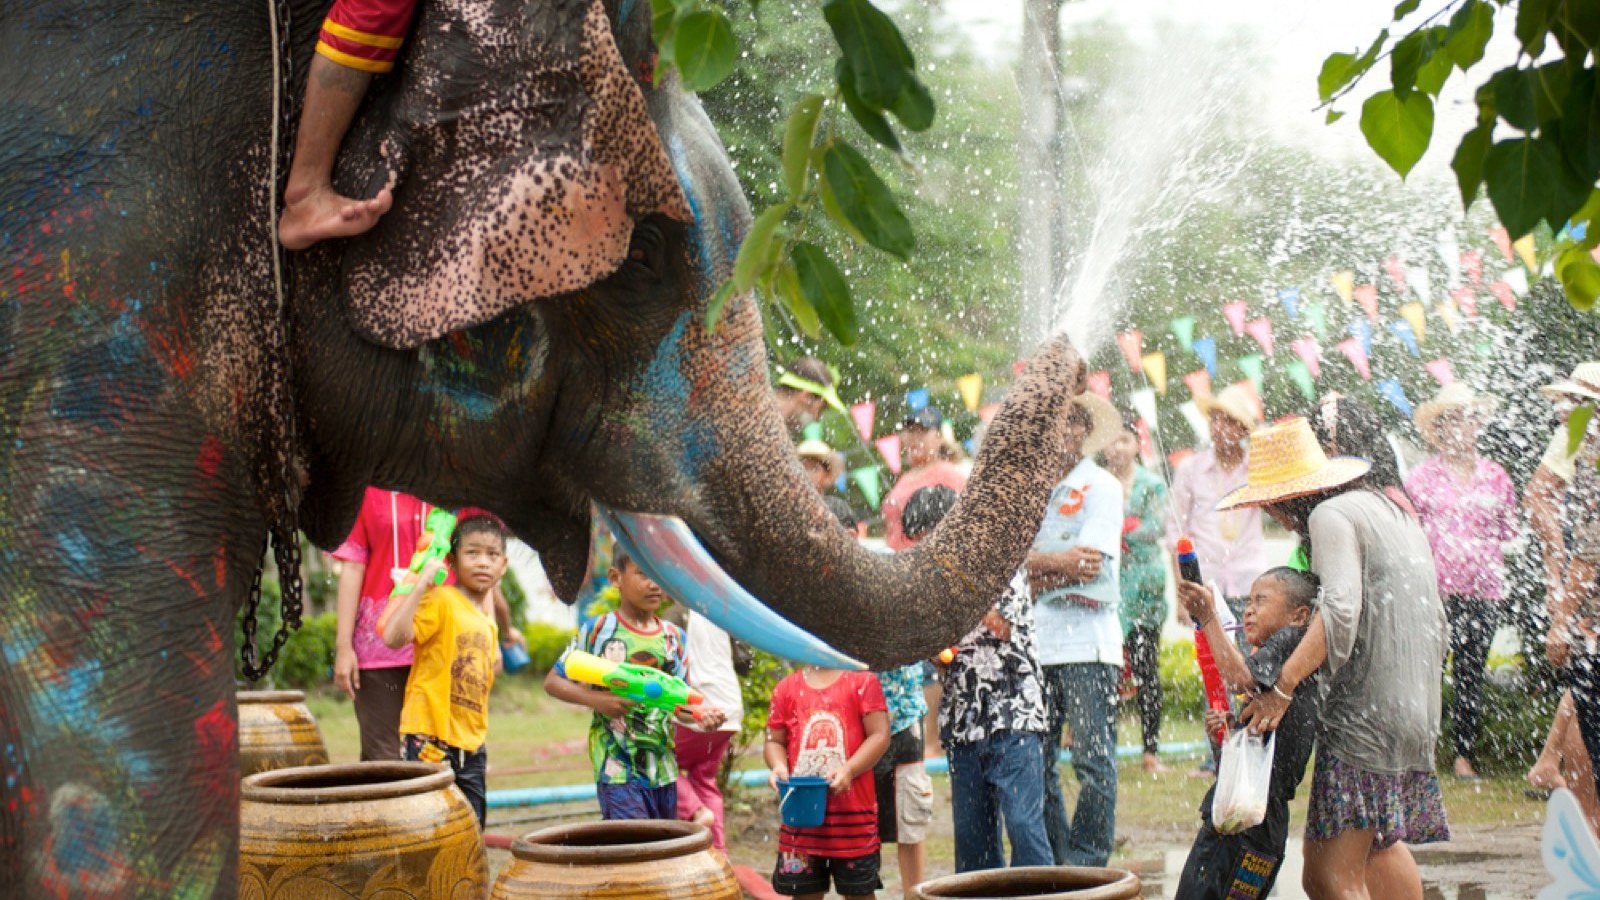 <p>The Songkran Festival celebrates the New Year and is held annually in mid-April. The Thai people celebrate by splashing water on each other to wash away the old year’s troubles and keep you moving forward in the new year. Many take this time to visit spiritual temples and remember those they have lost.</p>